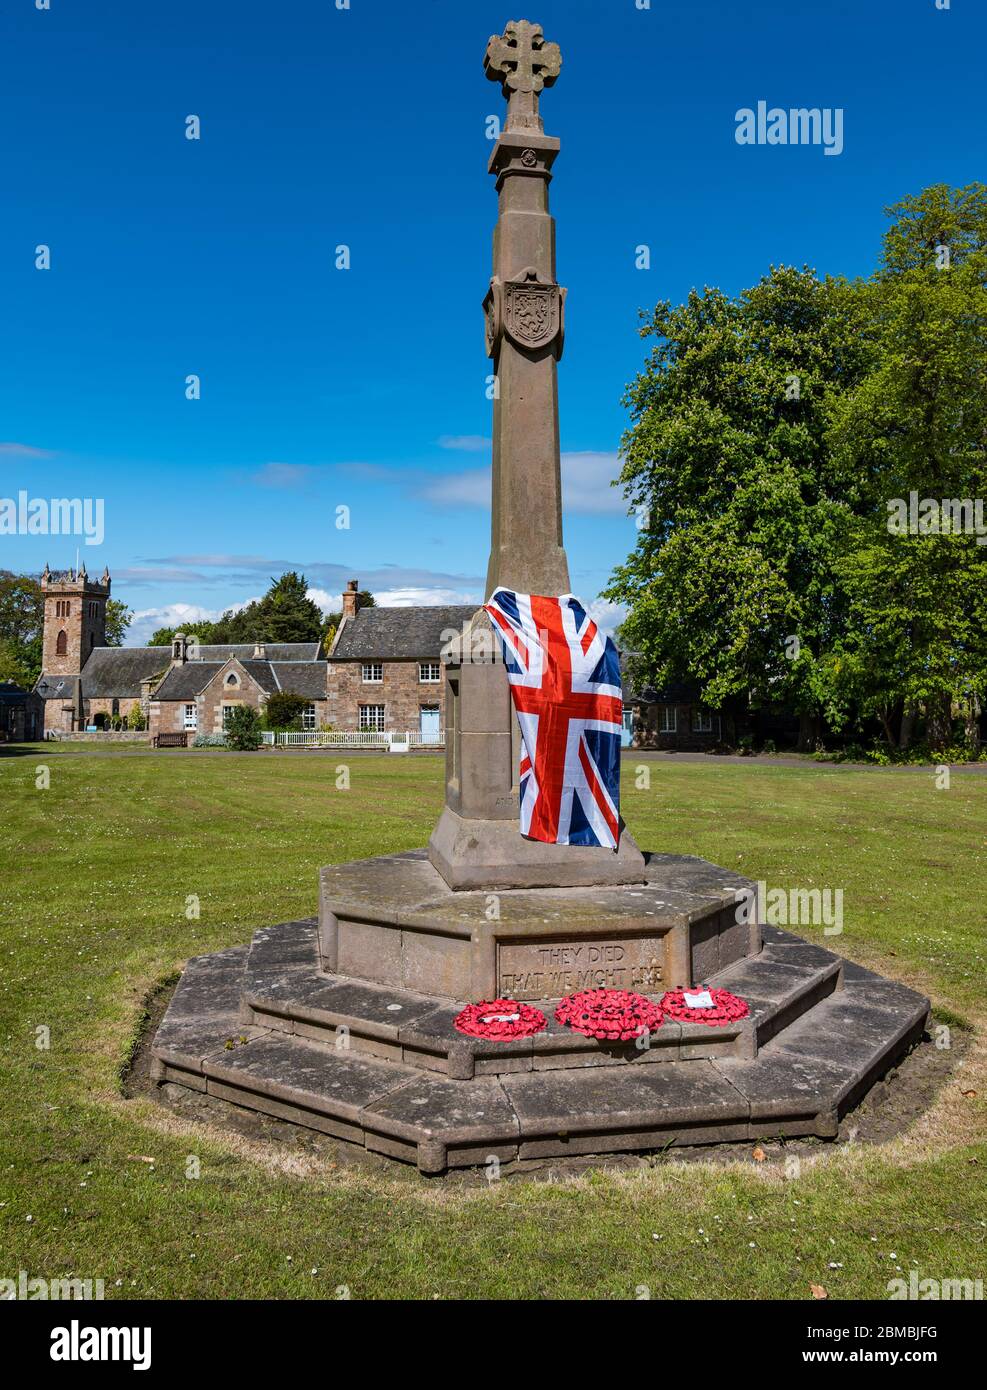 Dirleton village, East Lothian, Scotland, United Kingdom. 8th May, 2020. VE Day celebrations: a Union Jack flag draped over the war memorial in the village green on the 75th commemoration of Victory in Europe Day Stock Photo